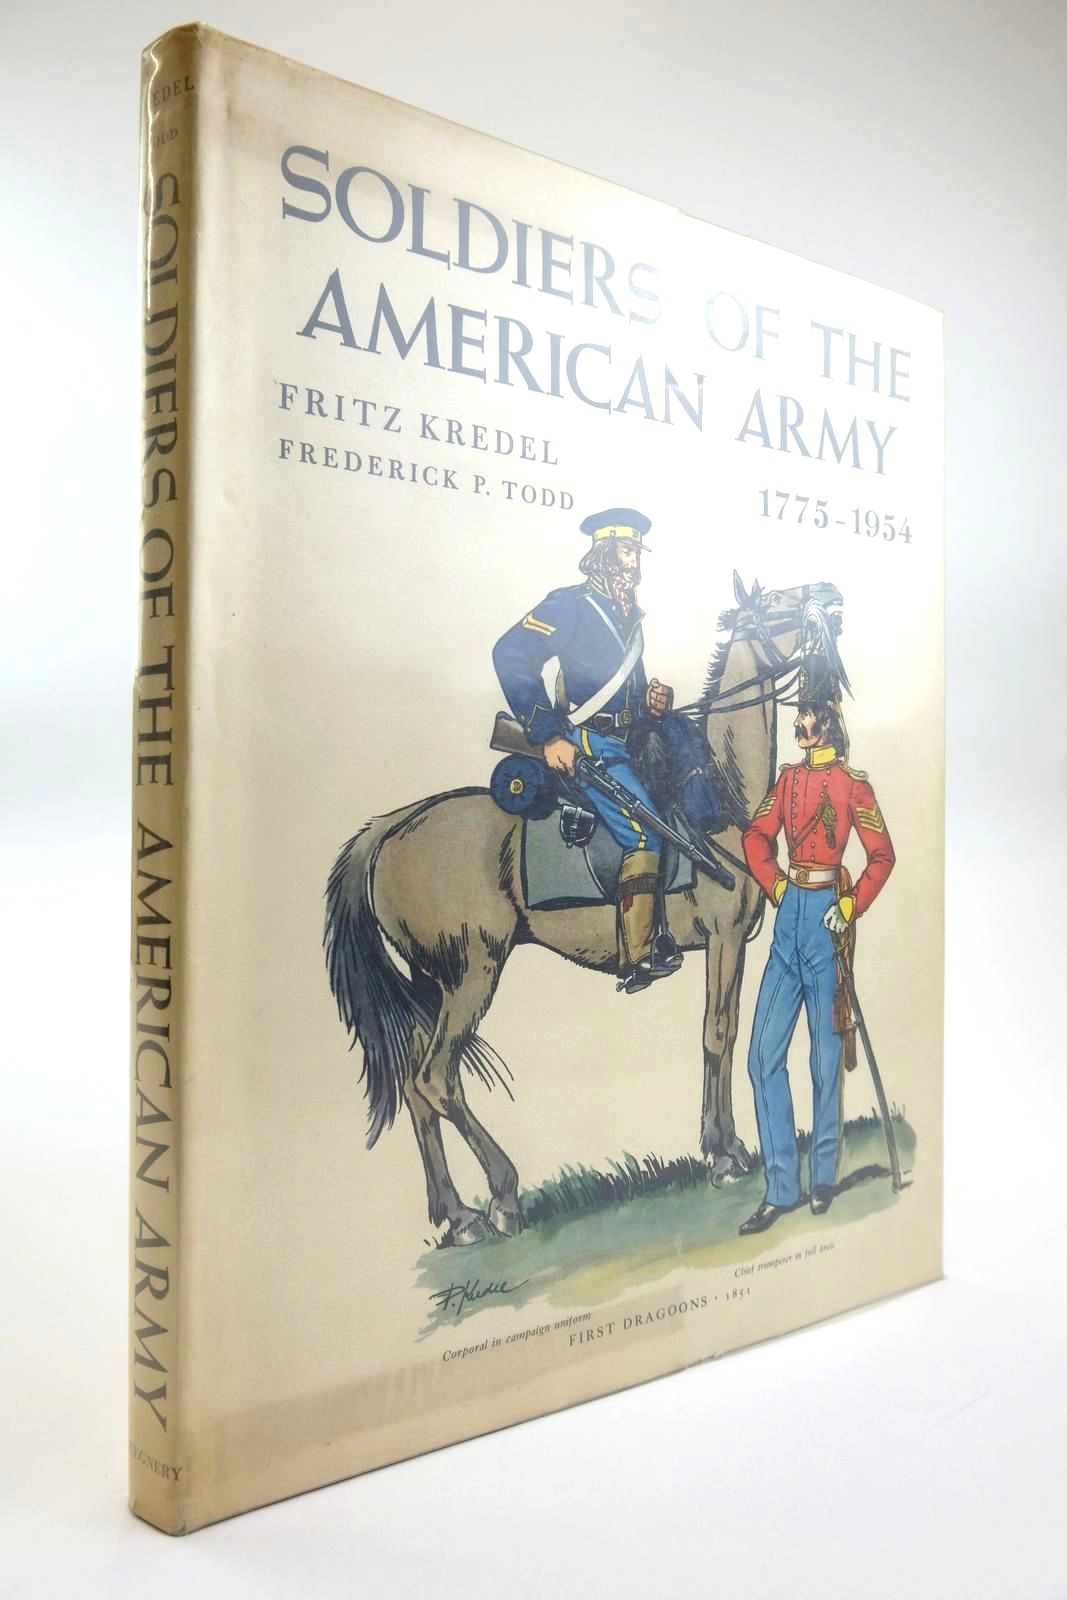 Photo of SOLDIERS OF THE AMERICAN ARMY 1775 - 1954 written by Kredel, Fritz Todd, Frederick P. illustrated by Kredel, Fritz published by Henry Regnery Company (STOCK CODE: 2133478)  for sale by Stella & Rose's Books